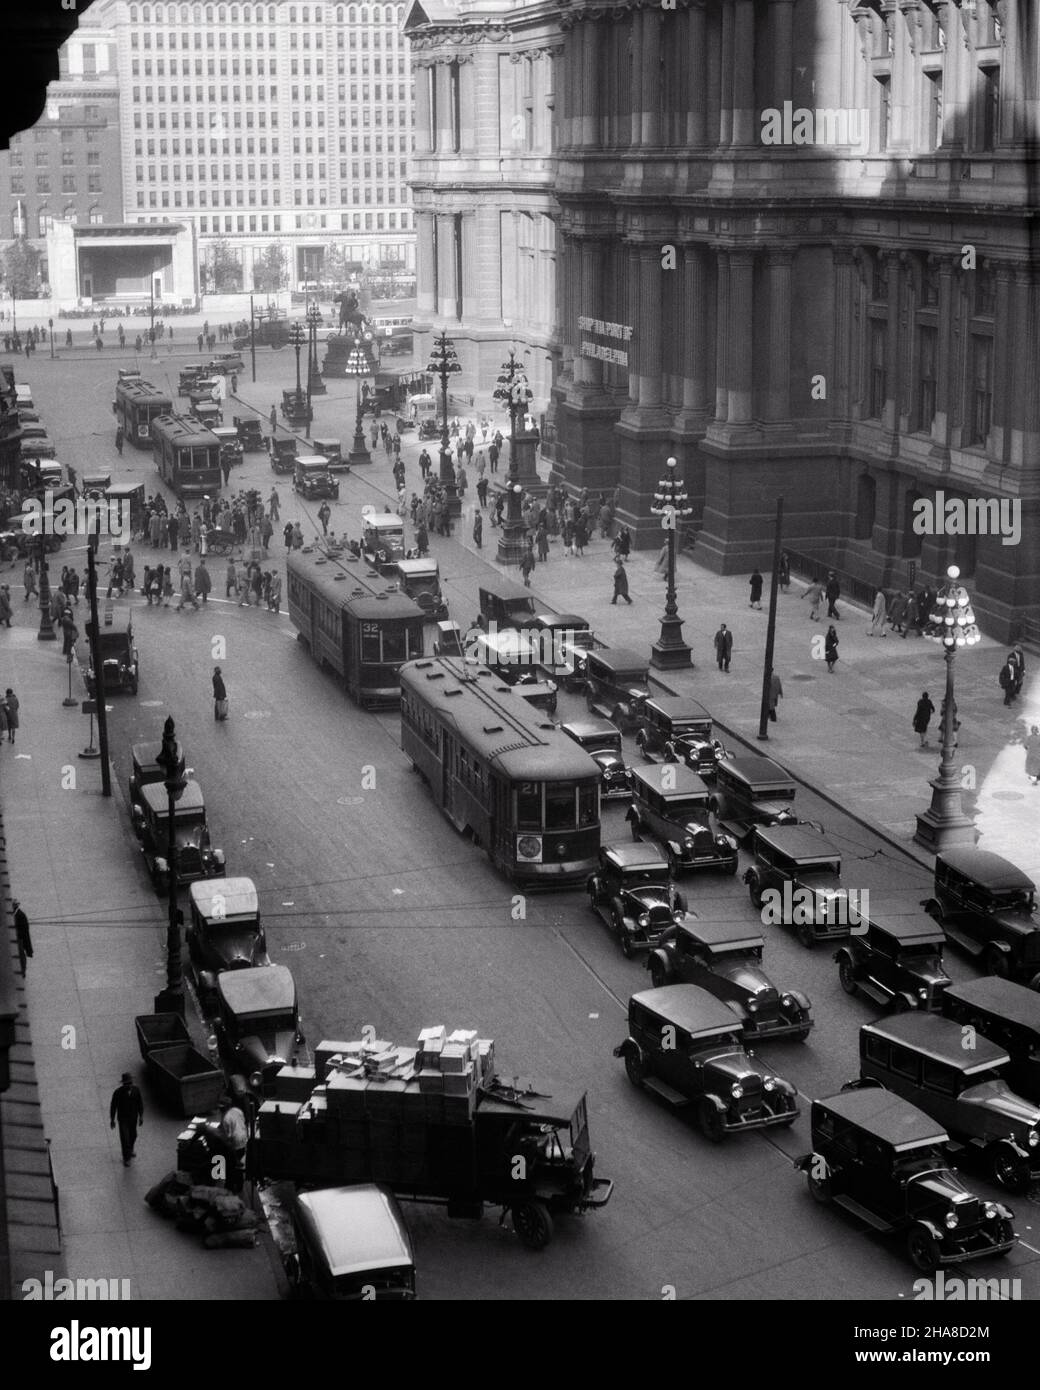 1920s 1930s TROLLEYS CARS TRUCKS TRAFFIC AROUND EAST SIDE OF CITY HALL LOOKING SOUTH PHILADELPHIA PENNSYLVANIA USA - p2547 HAR001 HARS HIGH ANGLE AUTOS EXTERIOR PA TROLLEY COMMONWEALTH AUTOMOBILES CITIES KEYSTONE STATE TROLLEYS VEHICLES STREETCARS TROLLEY BUS BLACK AND WHITE CITY OF BROTHERLY LOVE HAR001 OLD FASHIONED PUBLIC TRANSPORTATION STREETCAR TRAM TROLLEY CAR Stock Photo